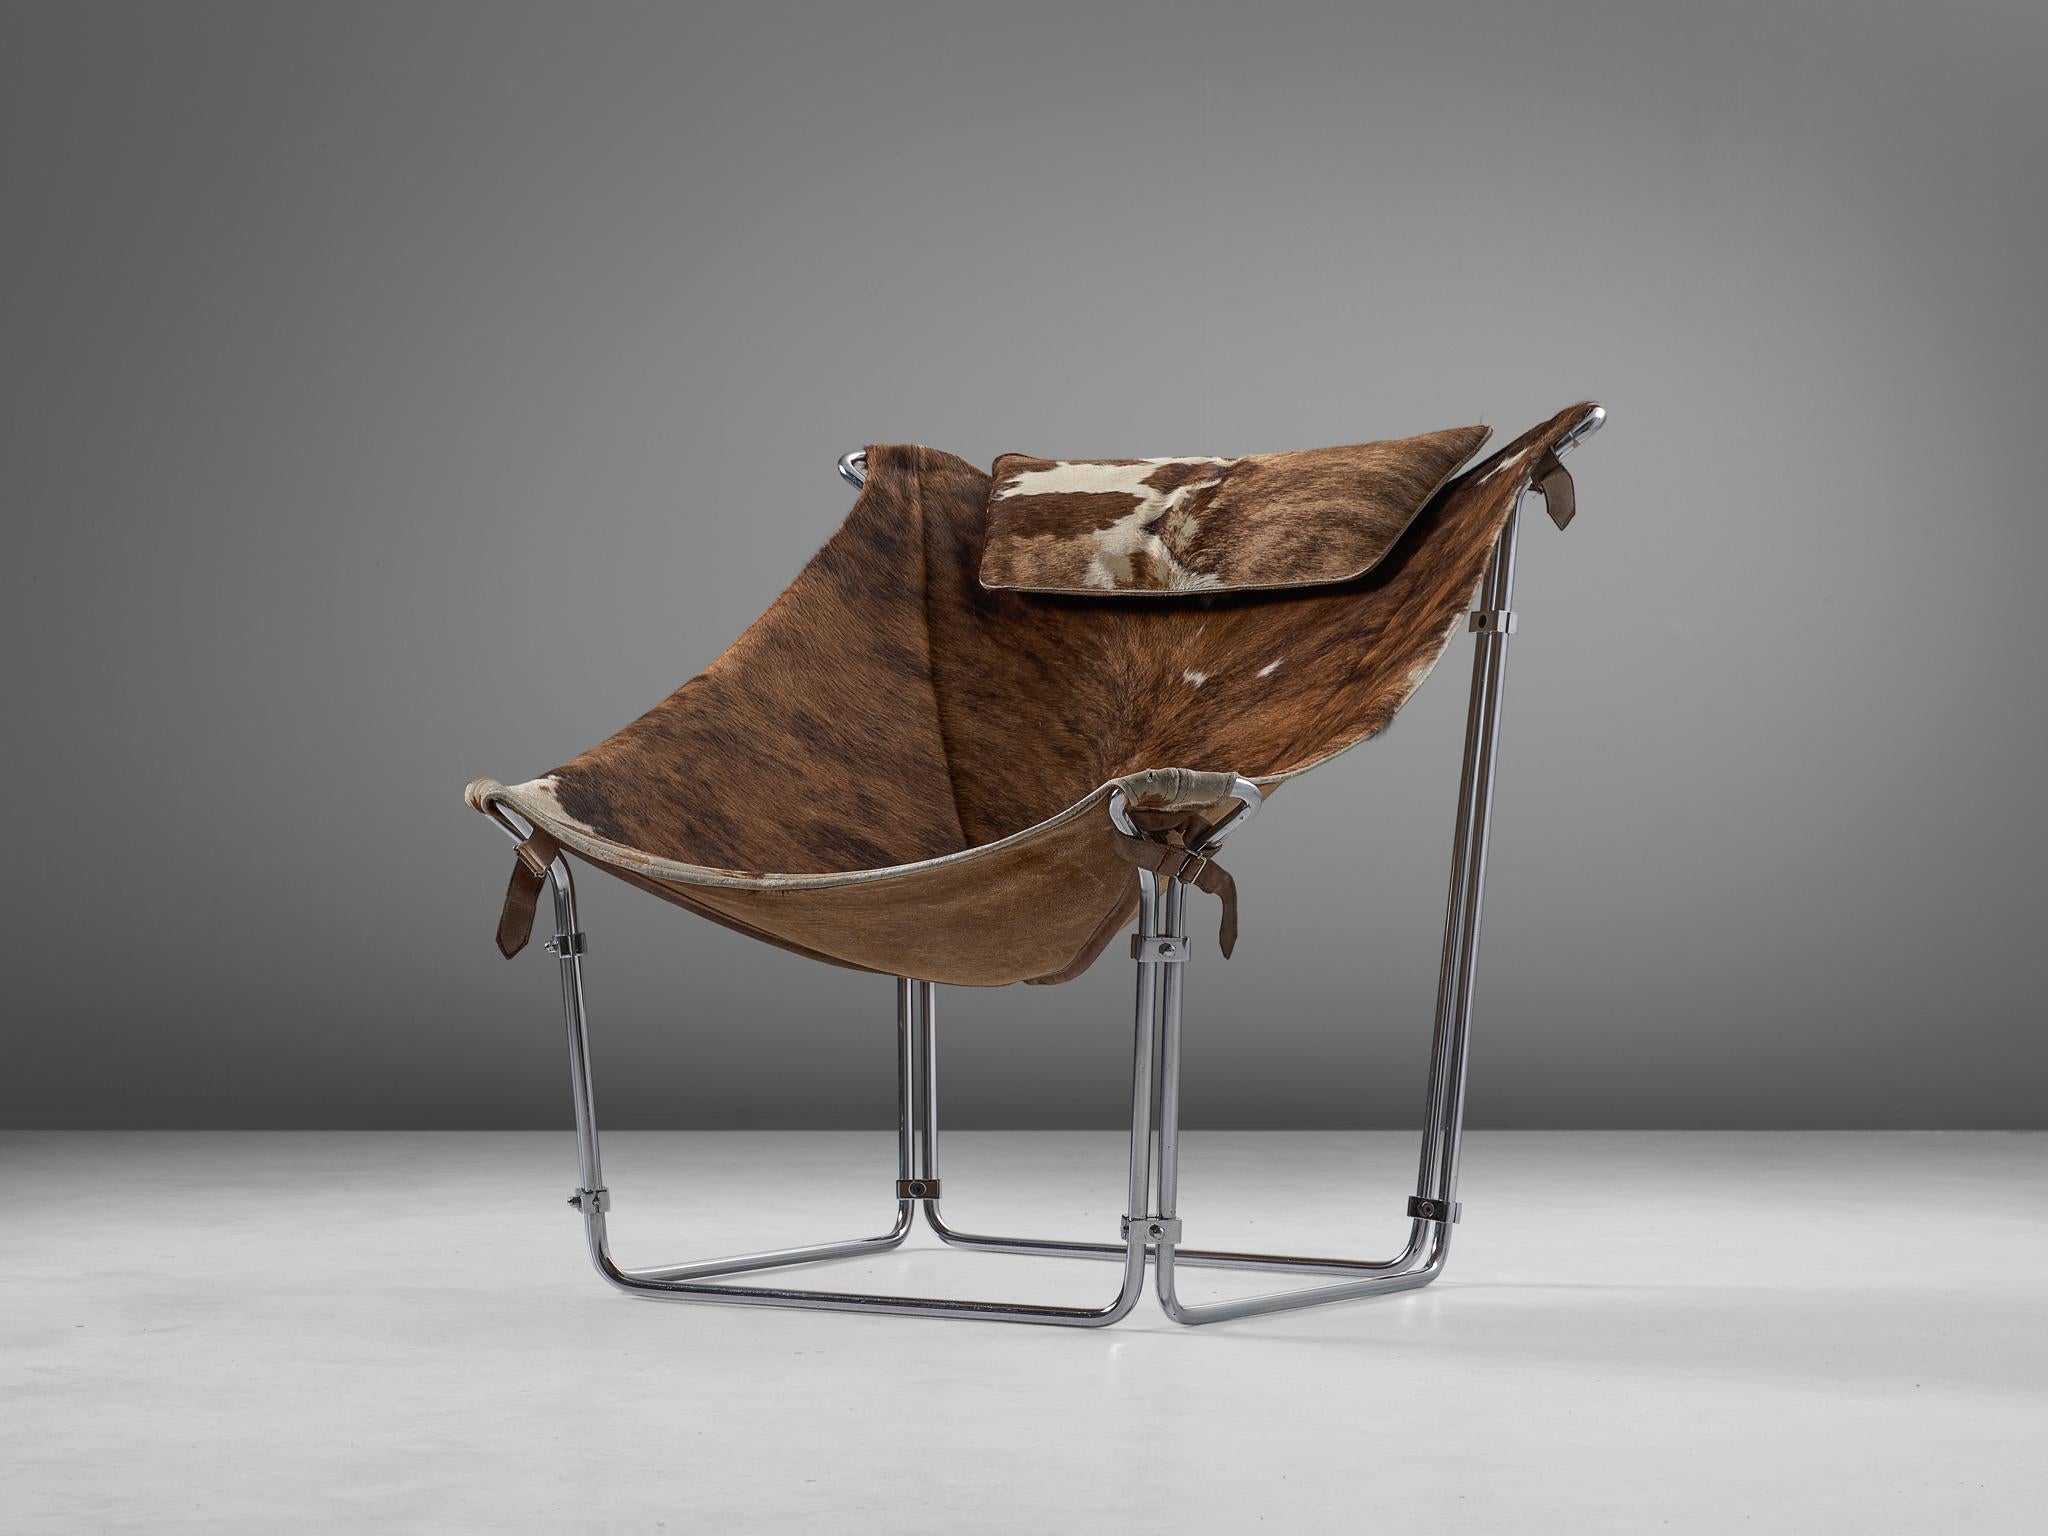 Kwok Hoi Chan for Steiner, lounge chair ‘Buffalo’, cow hide, tubular steel, France, 1969

This extraordinary lounge chair by Kwok Hoi Chan is produced by Steiner, Paris. What marks this design is the frame made of tubular steel in which a natural